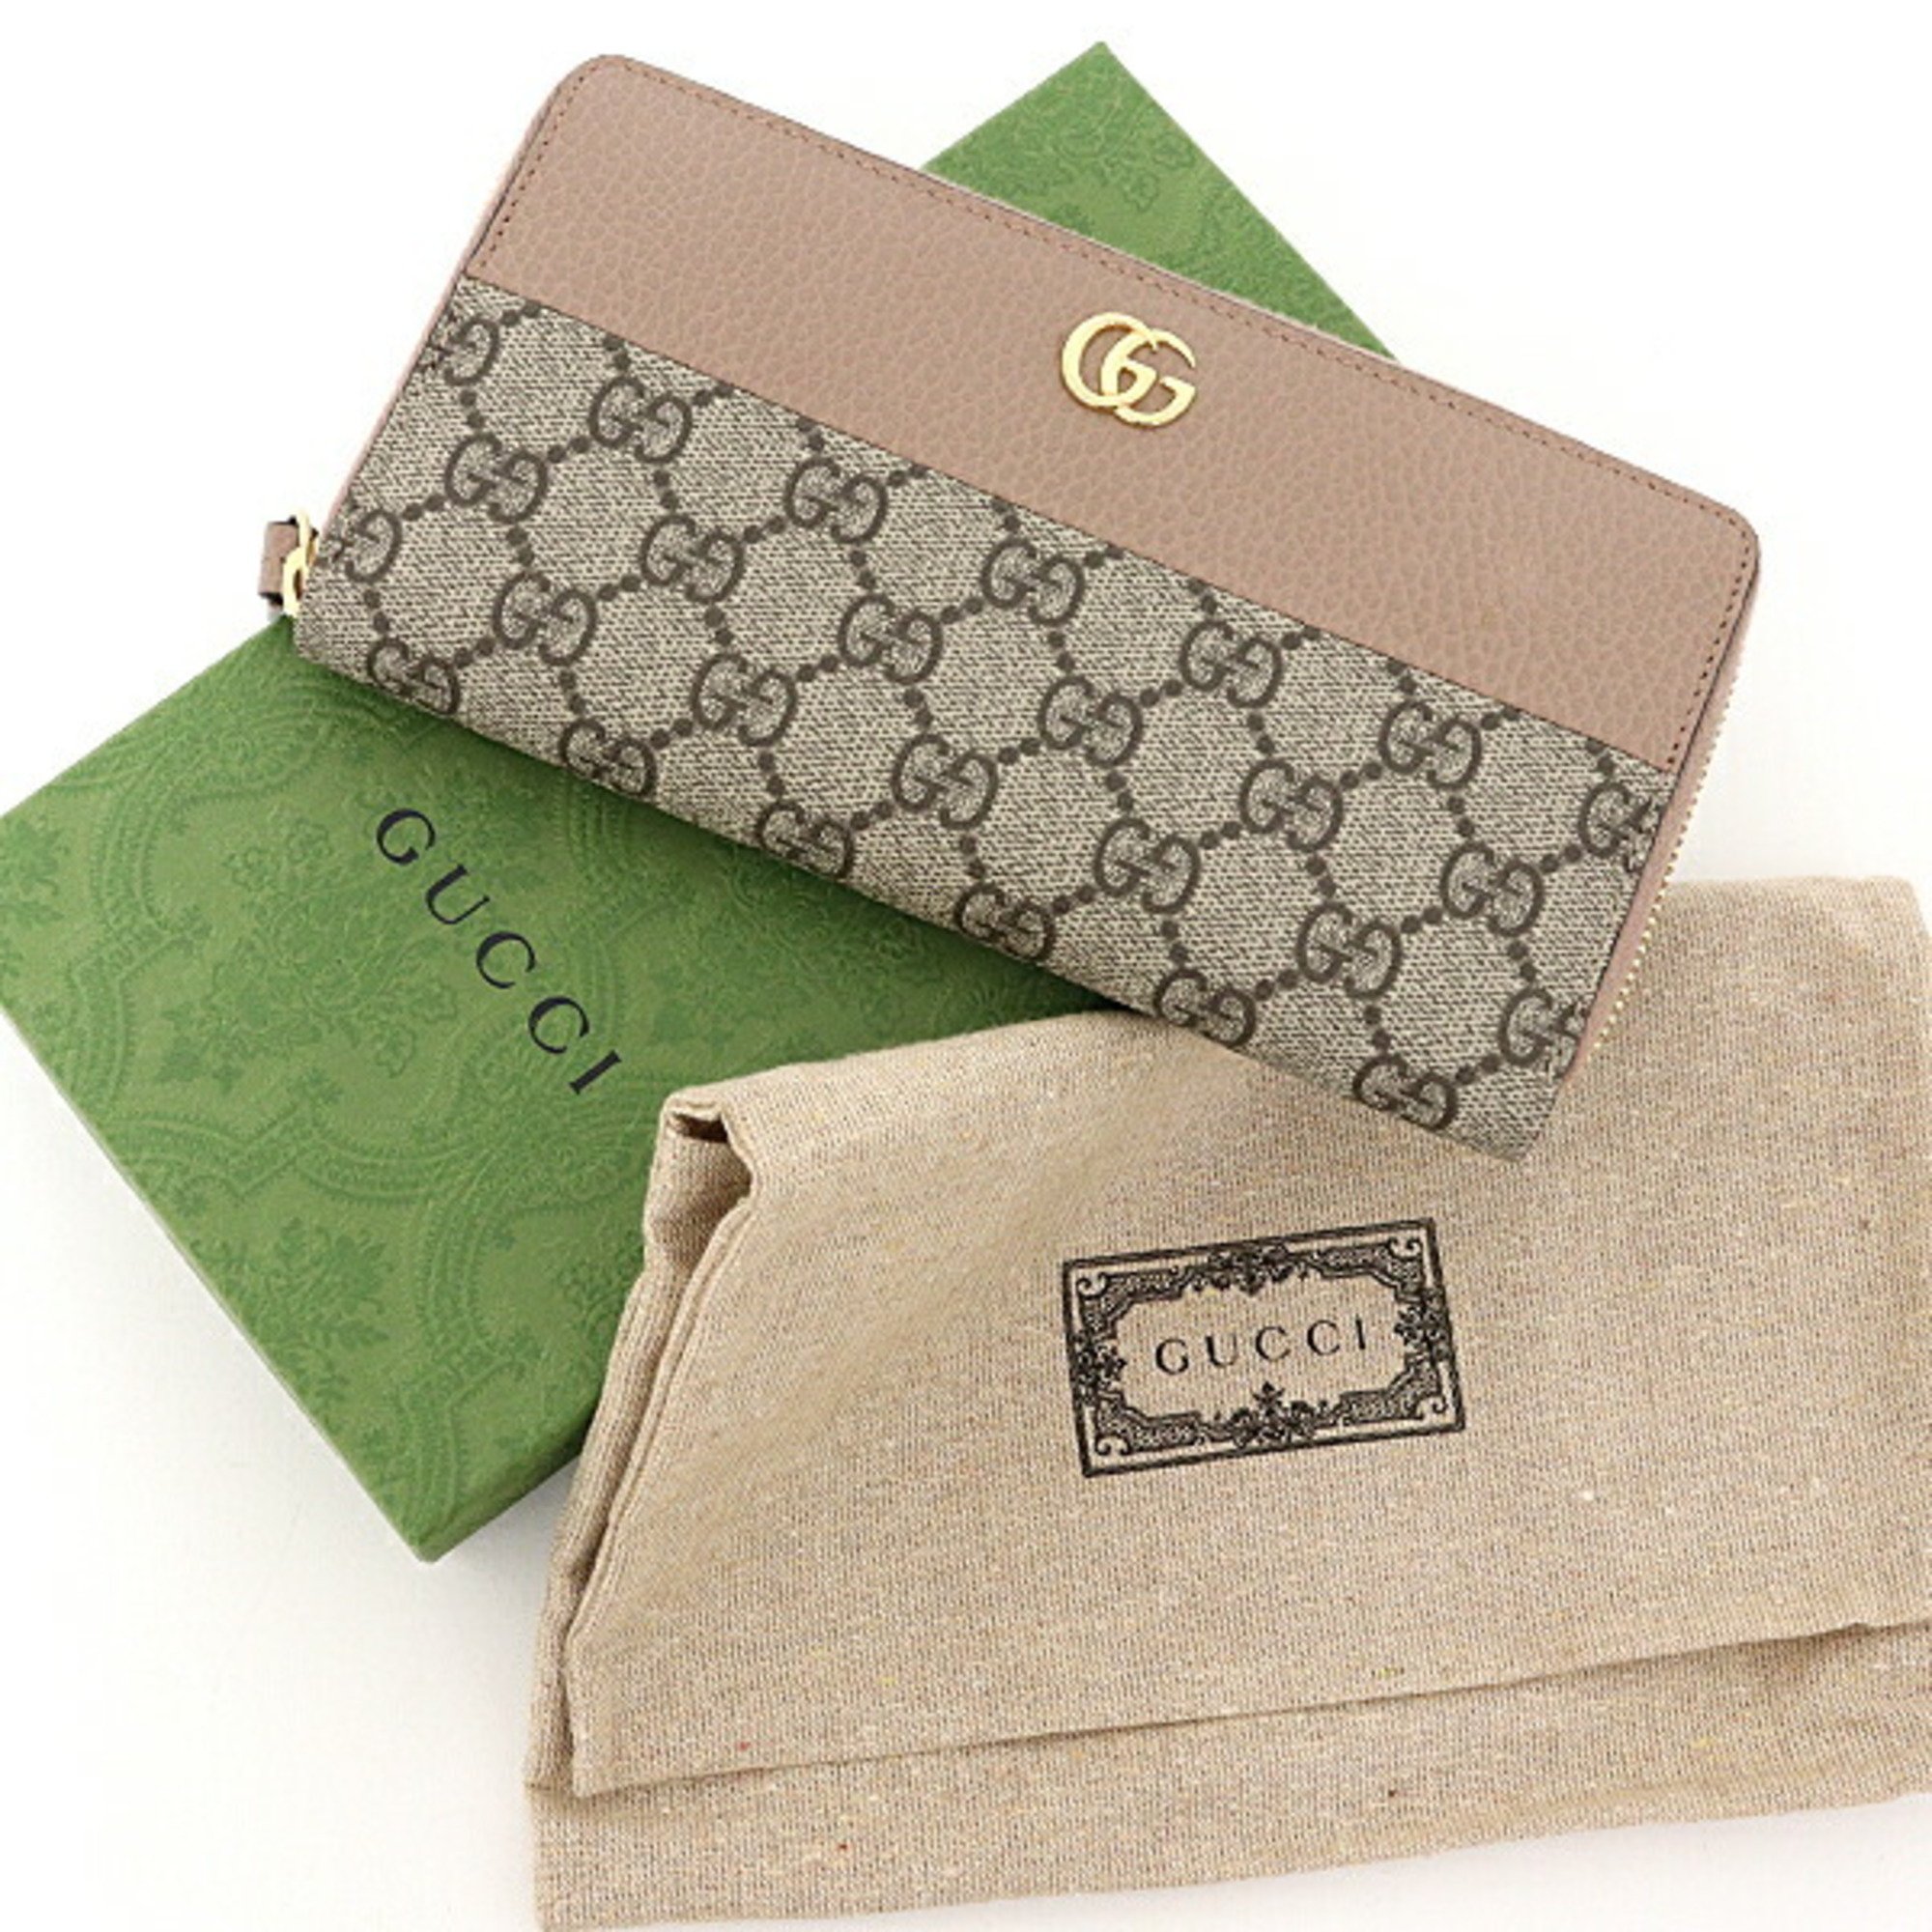 GUCCI Double G Zip Around Wallet Beige & Ebony GG Supreme Canvas Dusty Pink Leather 456117